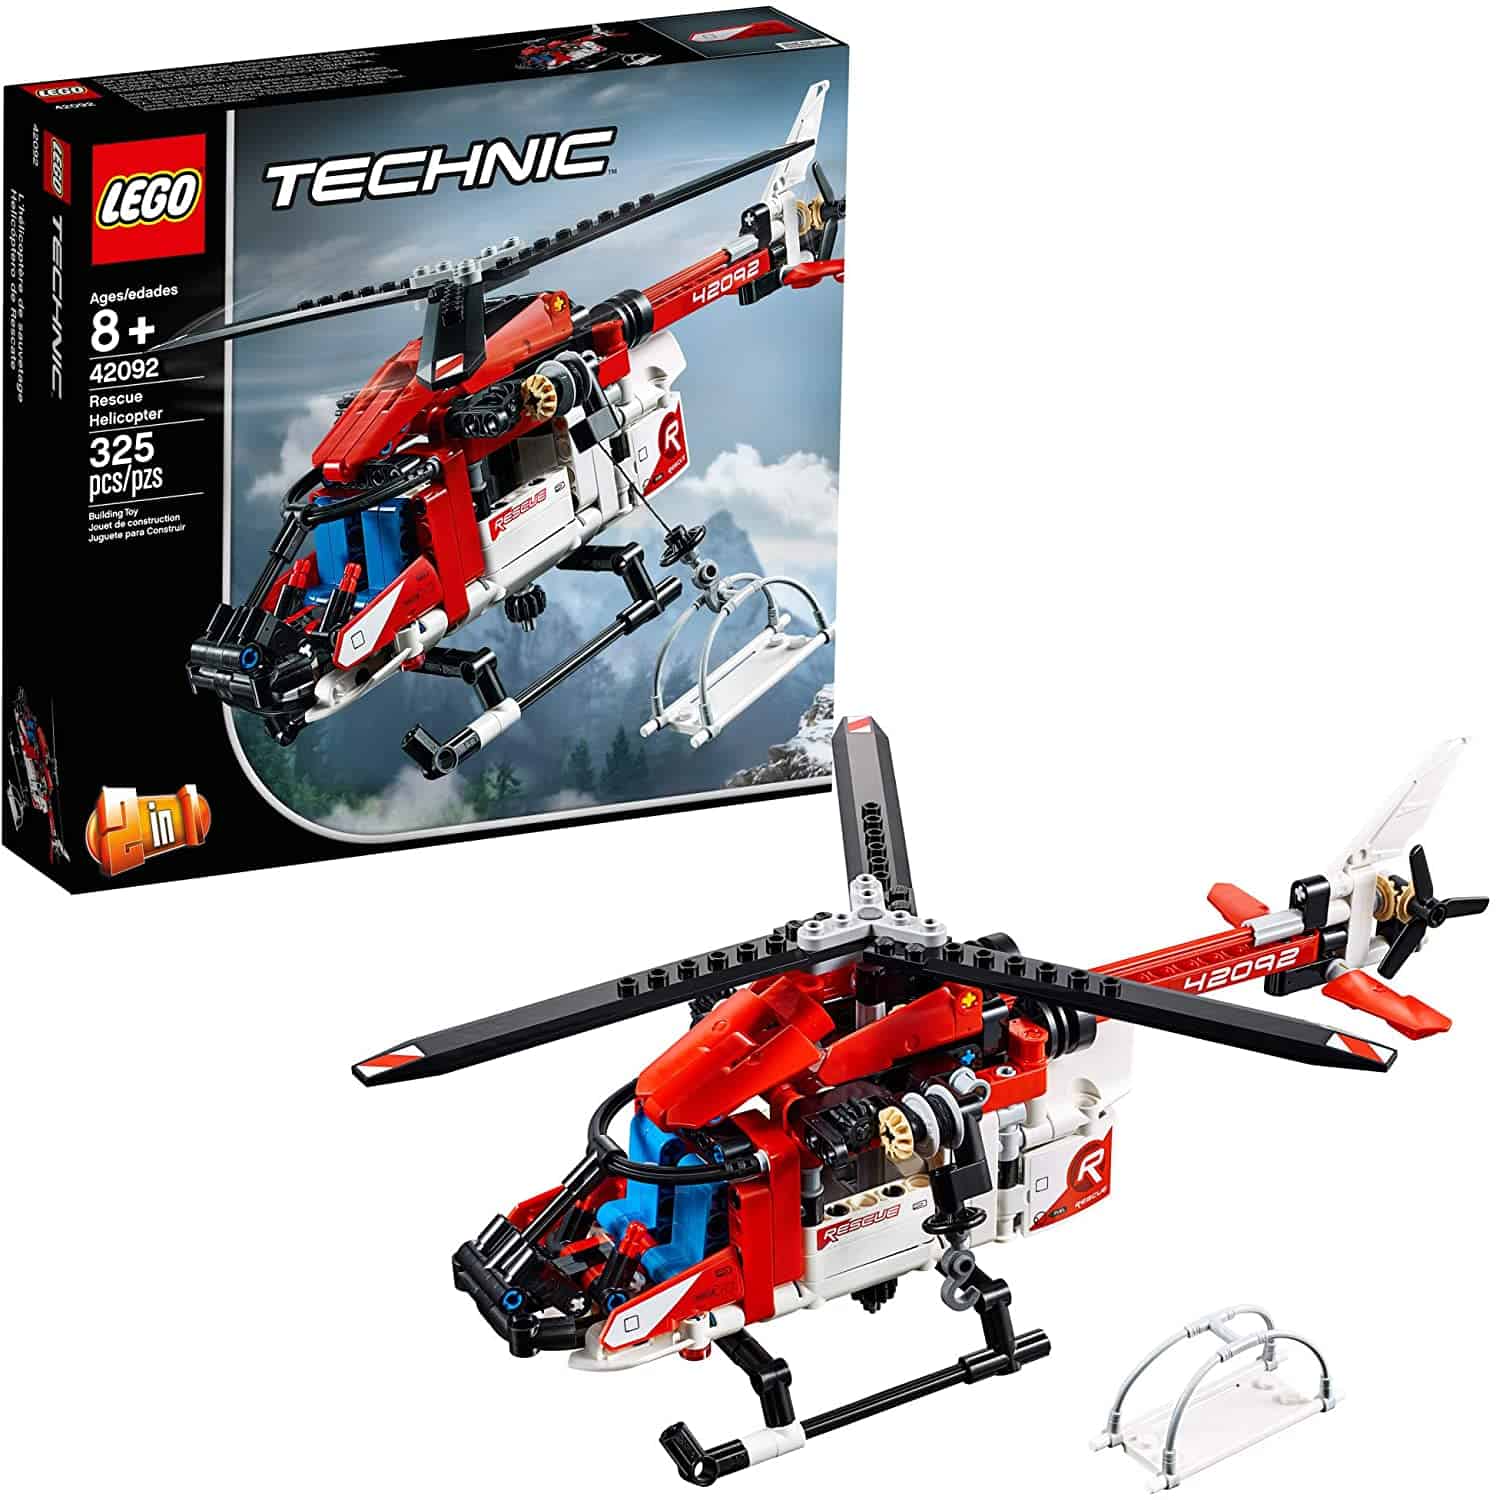 LEGO Technic Rescue Helicopter Building Kit 325 Pc ONLY $19 (Reg $40) – Amazon Prime Deal